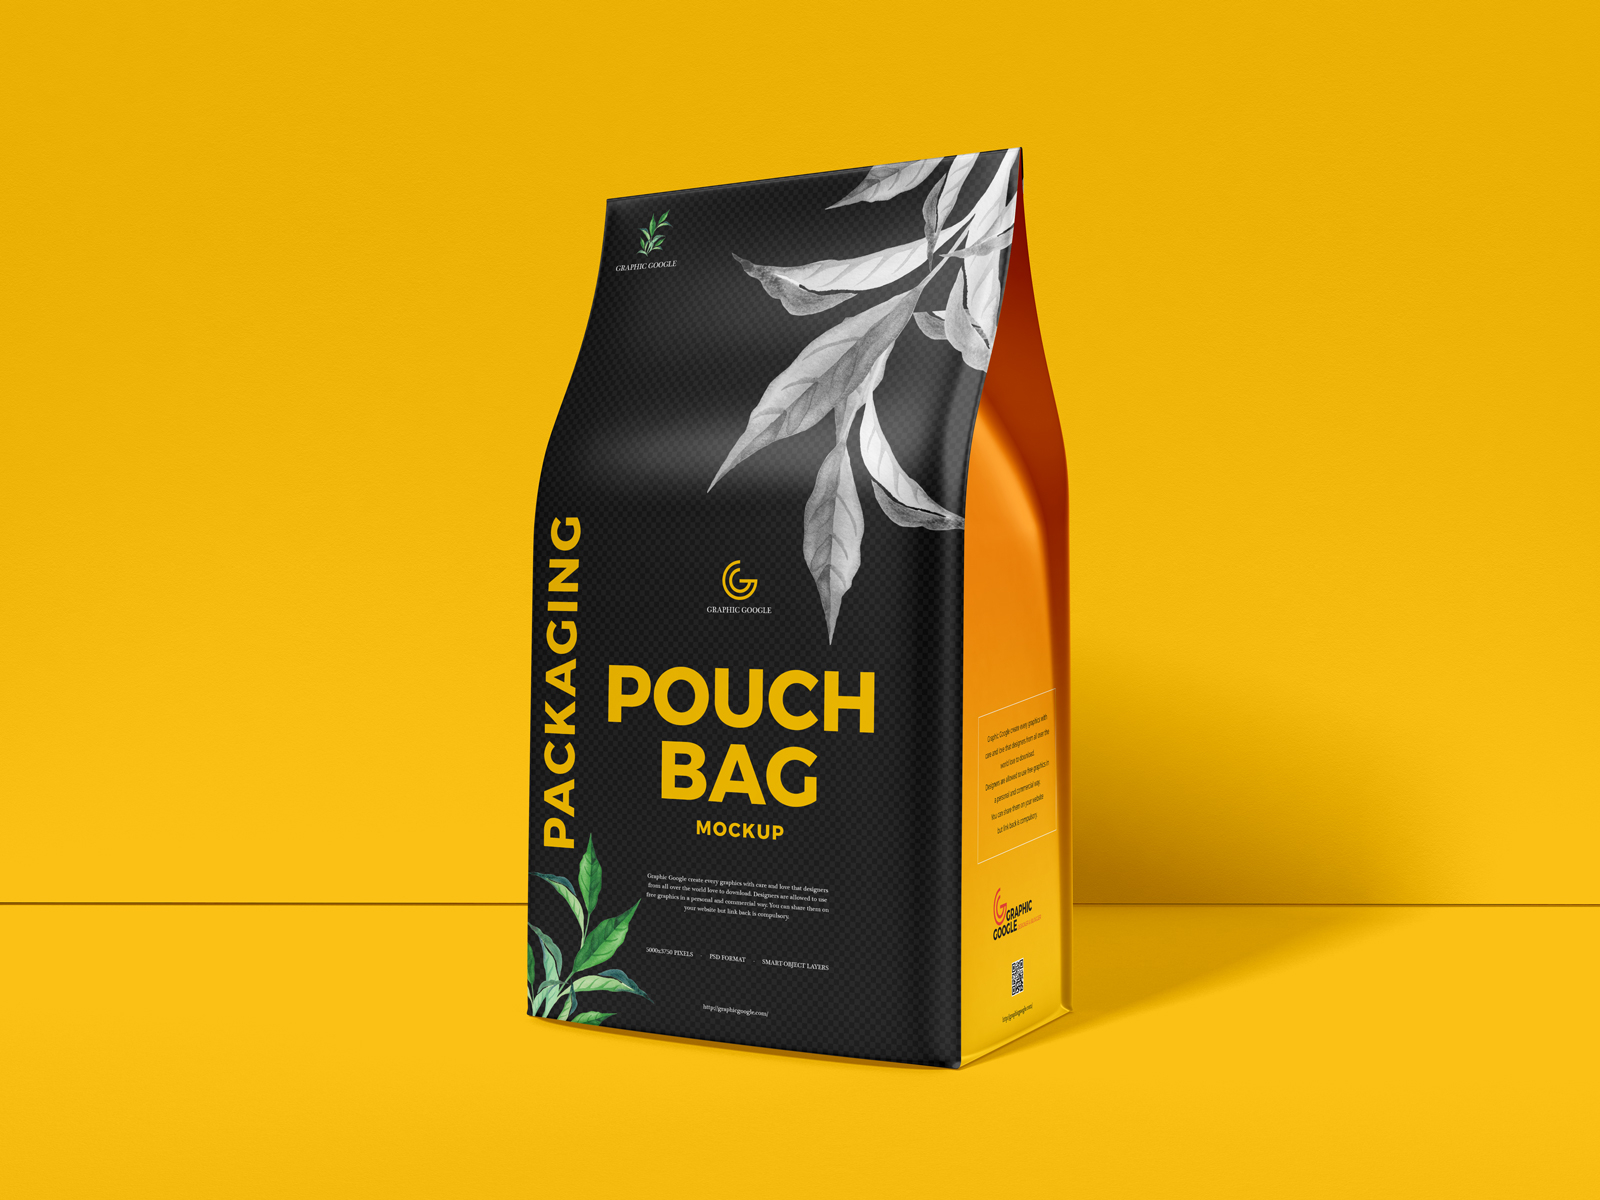 Download Free Packaging Pouch Bag Mockup By Graphic Google On Dribbble PSD Mockup Templates